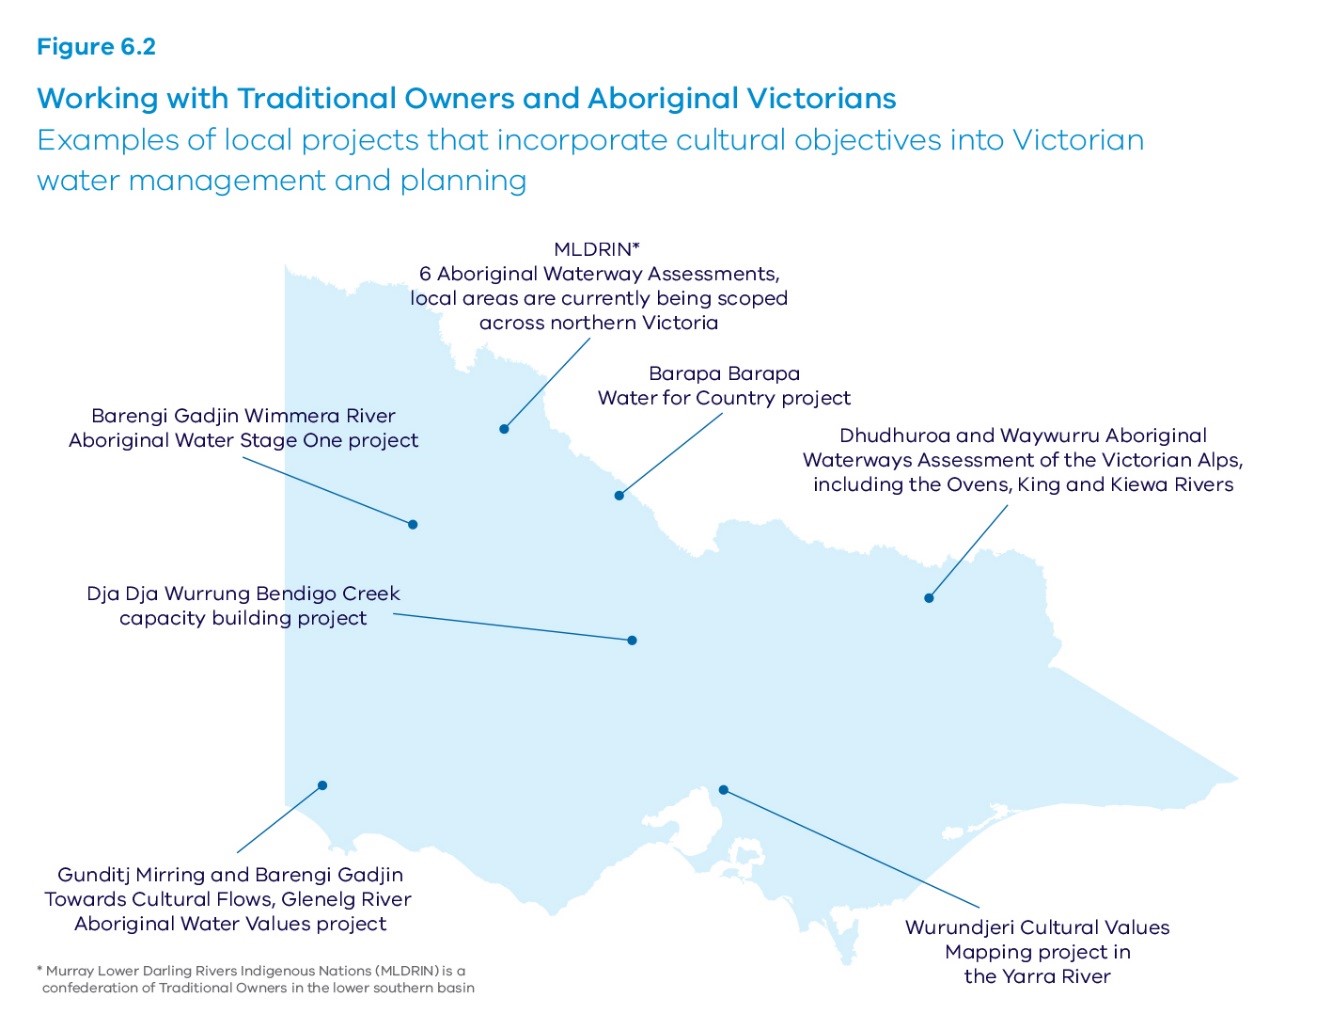 Figure 6.2. Working with traditional owners and aboriginal victorians. 